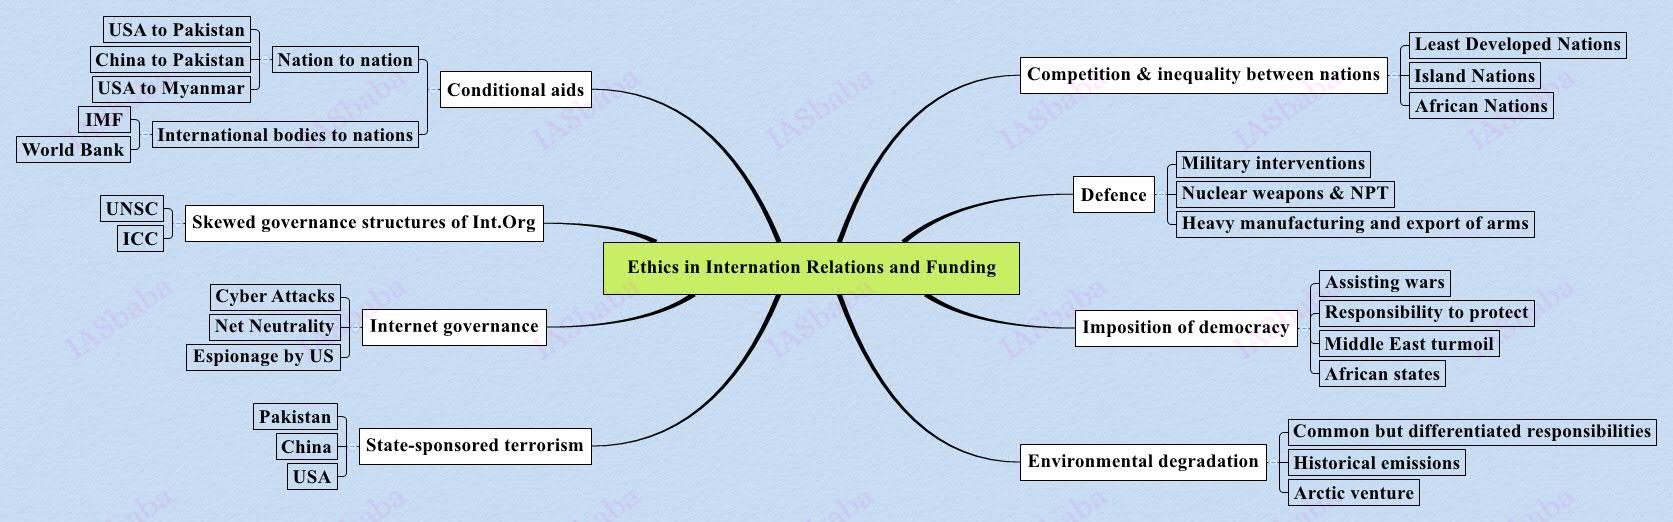 Ethics in Internation Relations and Funding